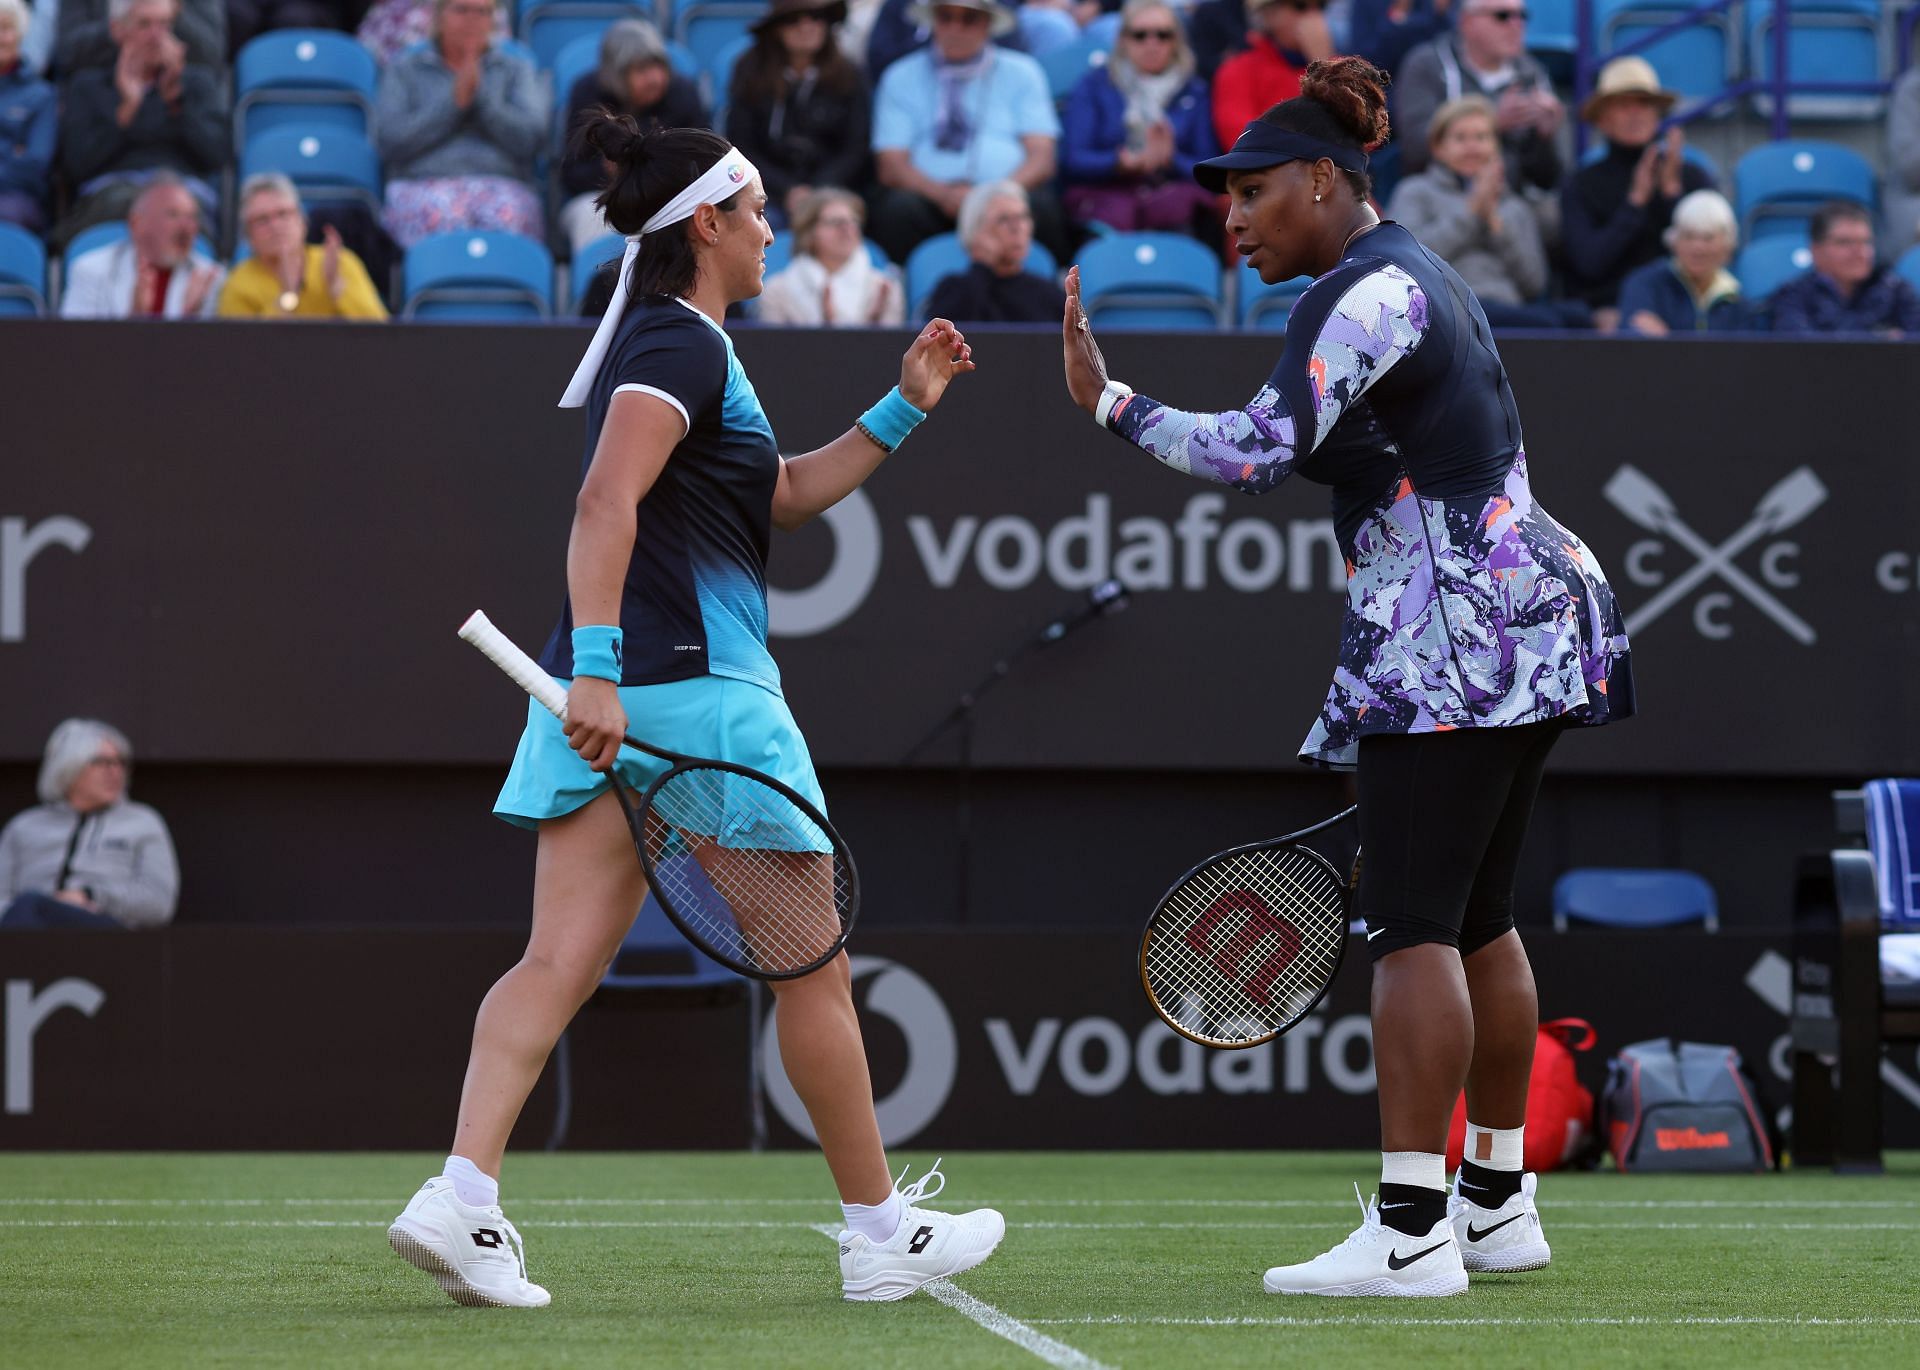 Ons Jabeur is partnering with Serena Williams at the Rothesay International Eastbourne